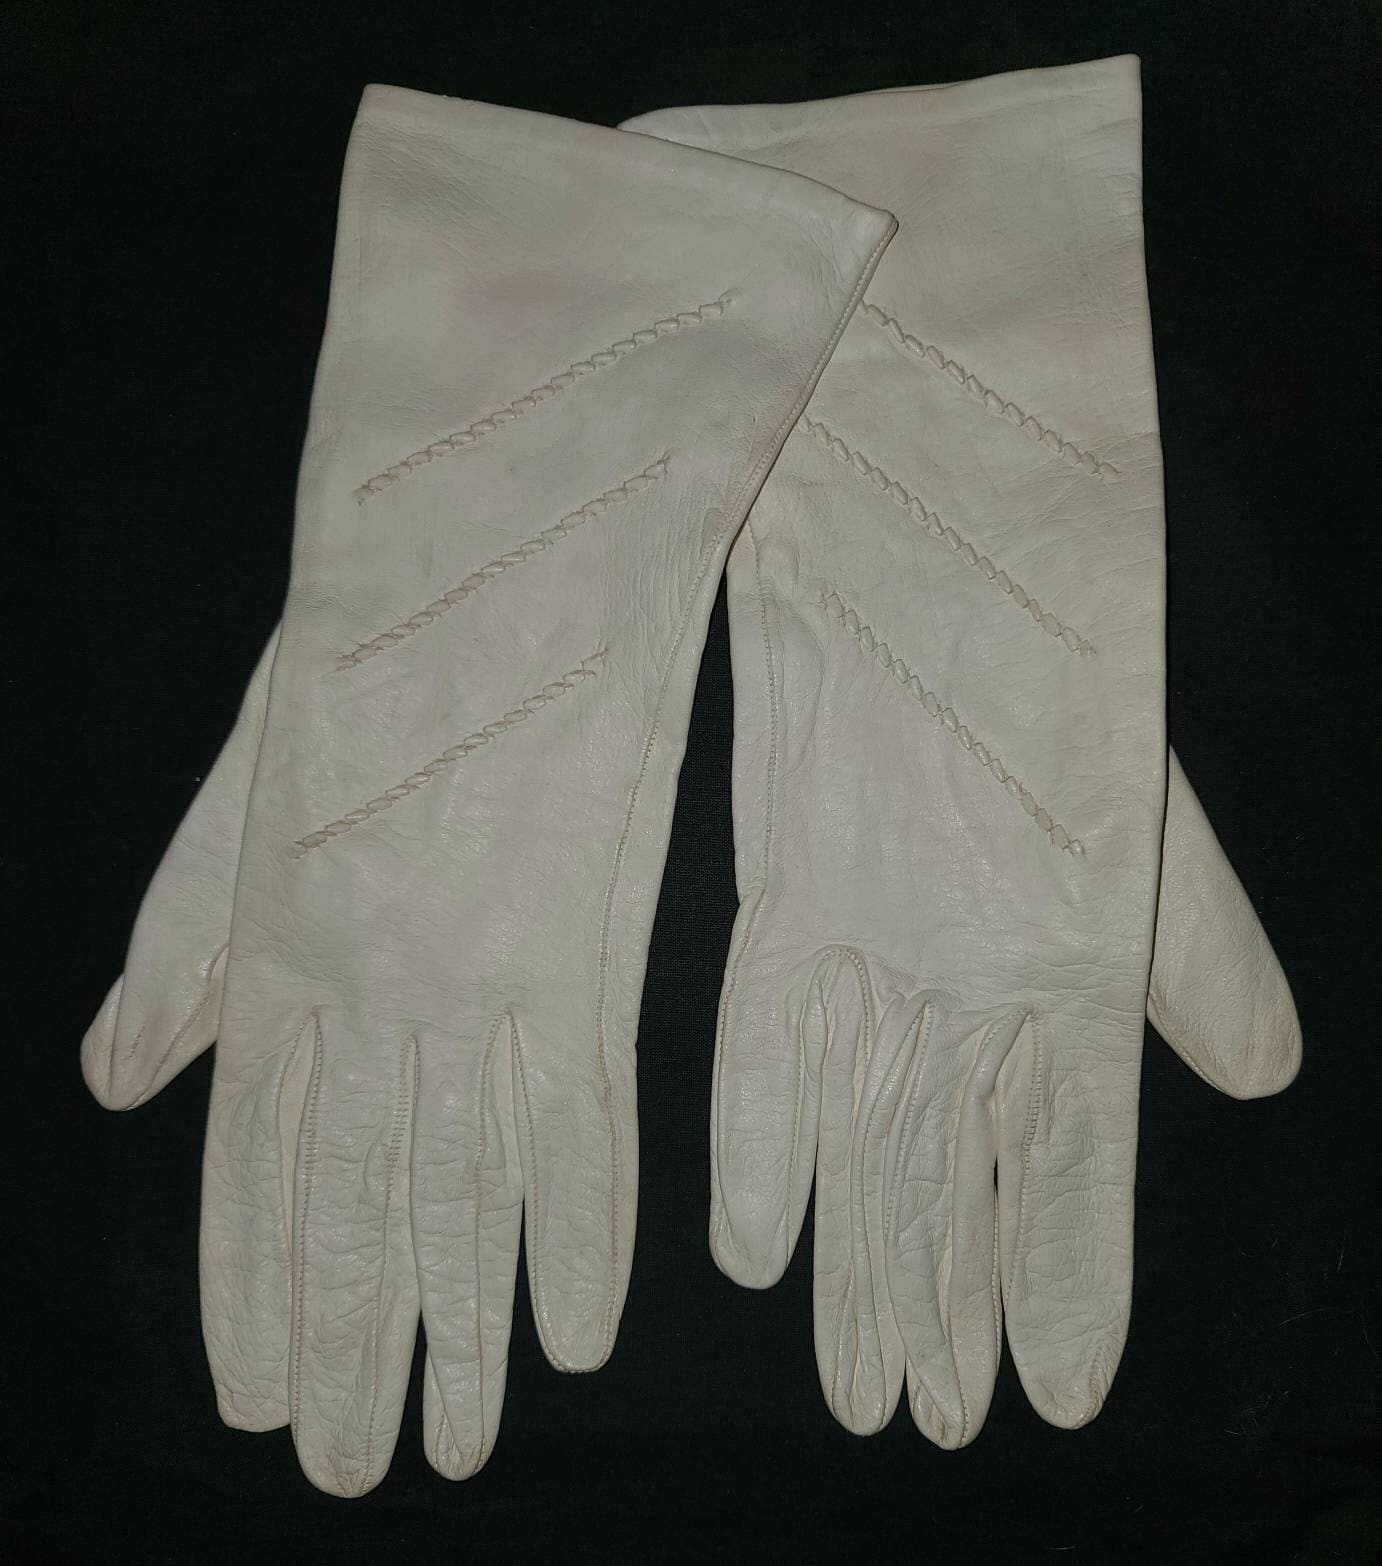 Vintage Leather Gloves 1950s 60s Mid Length Creamy White Leather Gloves Diagonal Stitching Rockabilly Boho 7.5 small stain